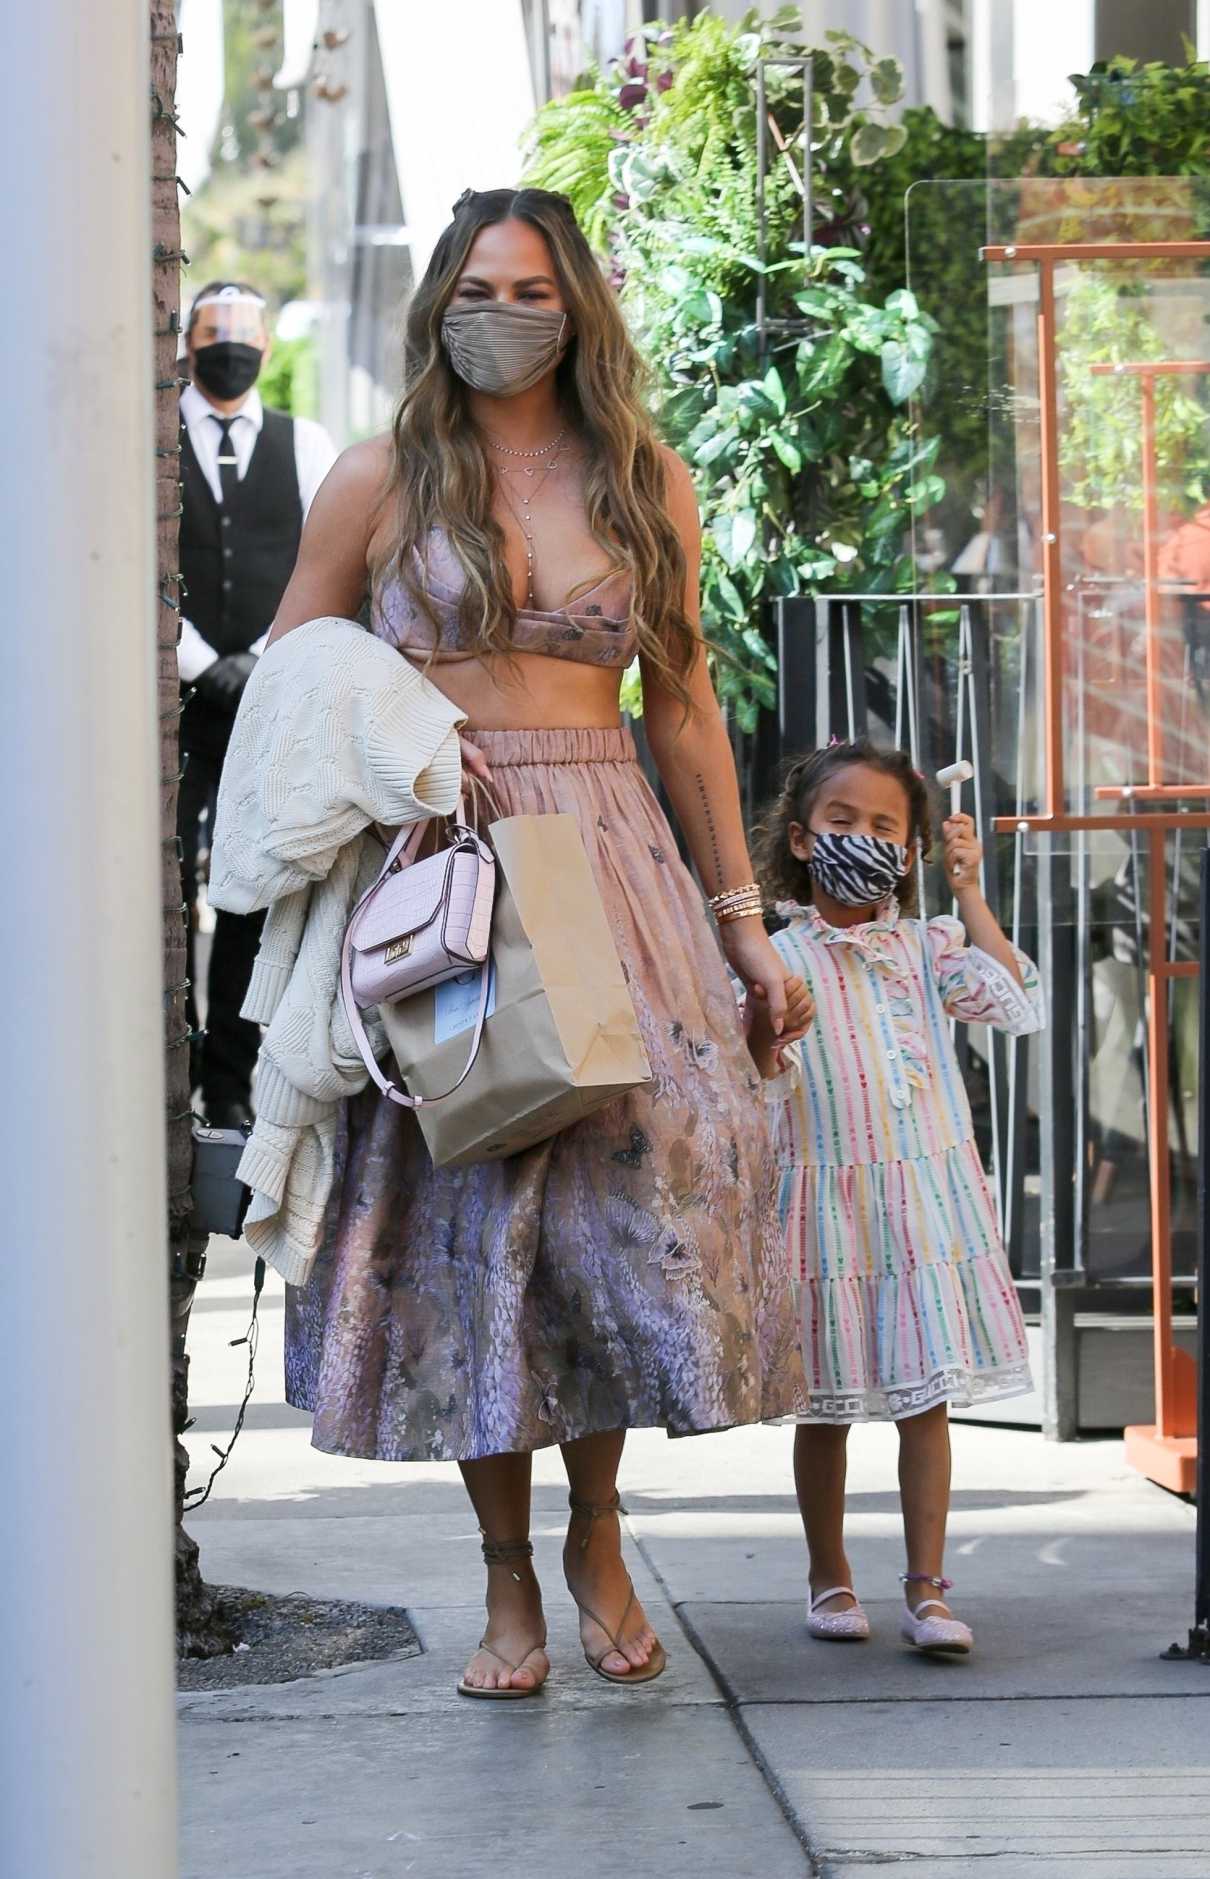 Chrissy Teigen in an Olive Protective Mask